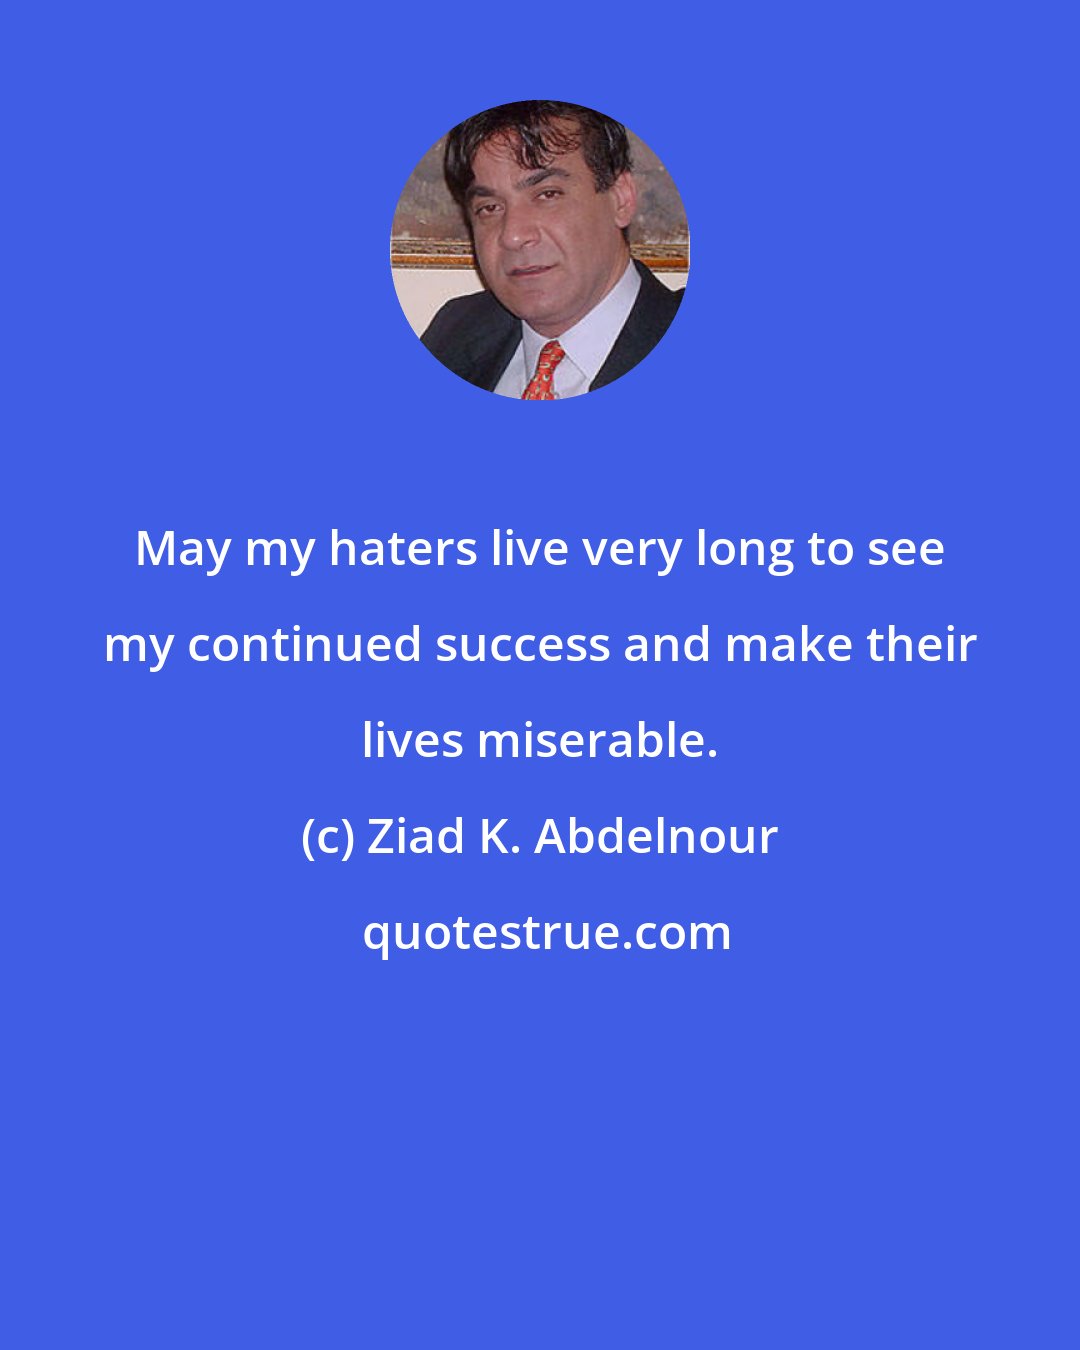 Ziad K. Abdelnour: May my haters live very long to see my continued success and make their lives miserable.